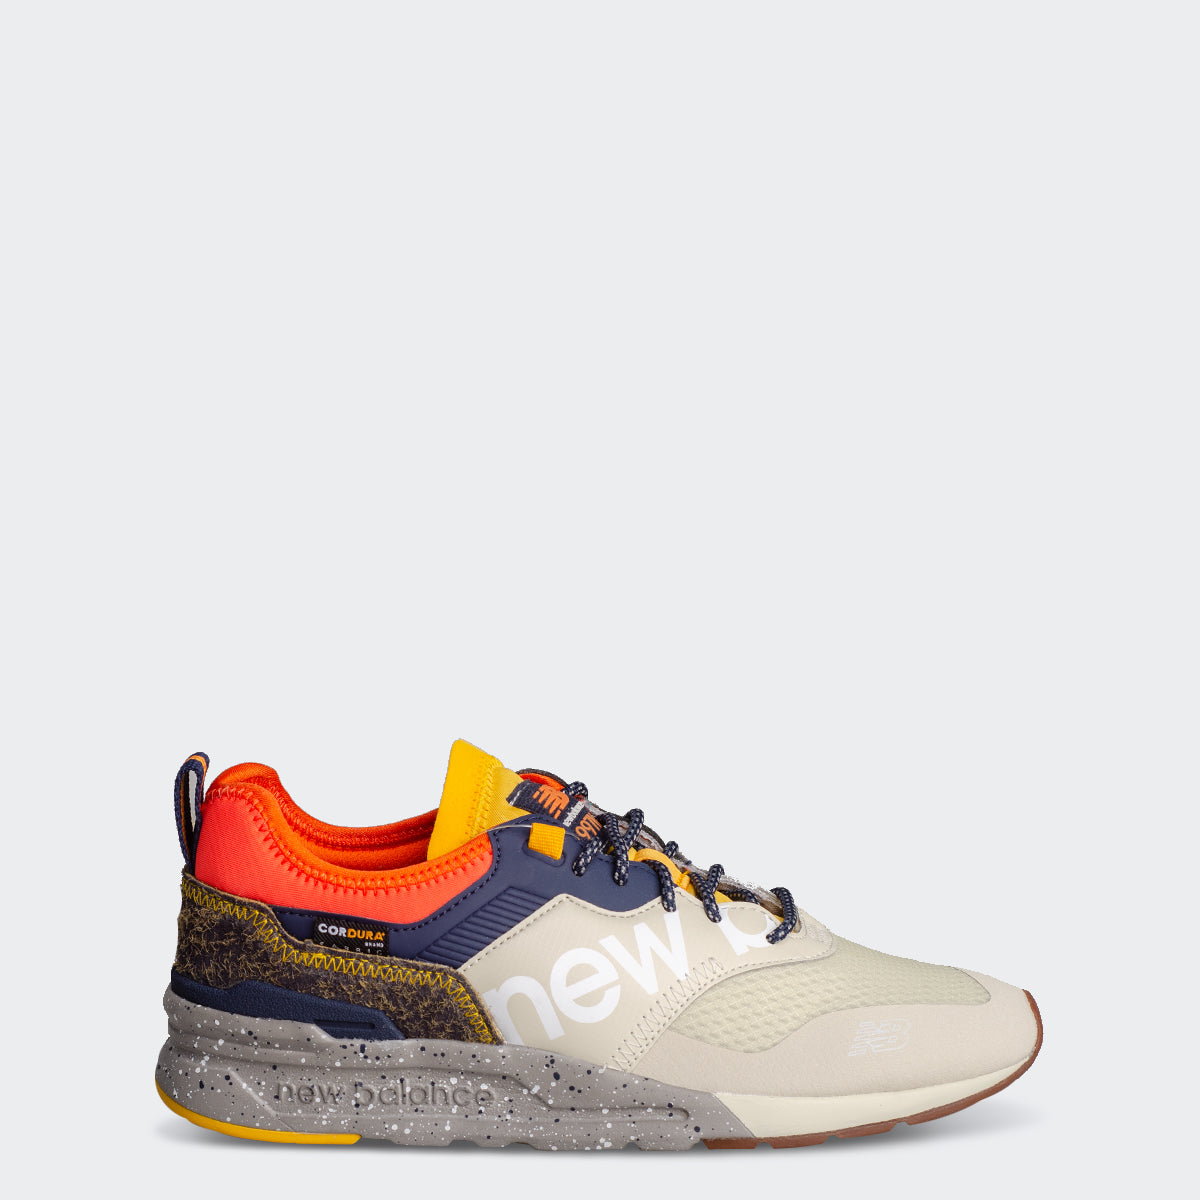 Men's New Balance 997H Shoes Oyster 